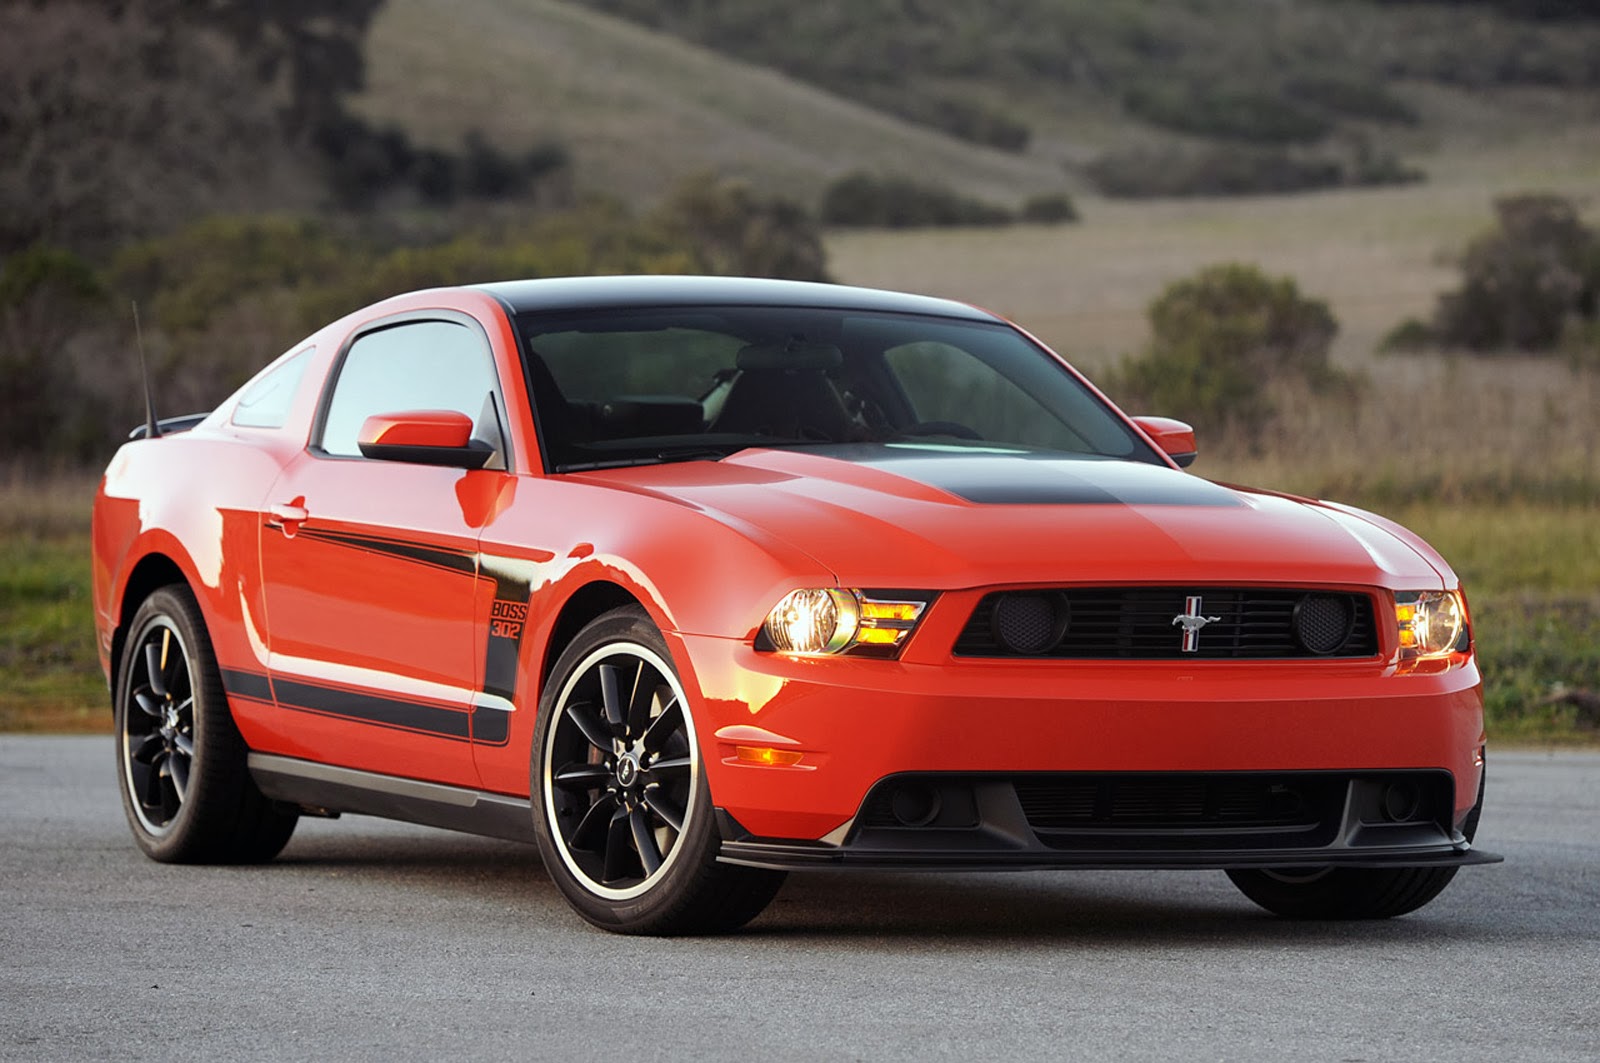 Cool Red Ford Mustang Boss 302 Muscle Sport Ca #8998 Wallpaper ...